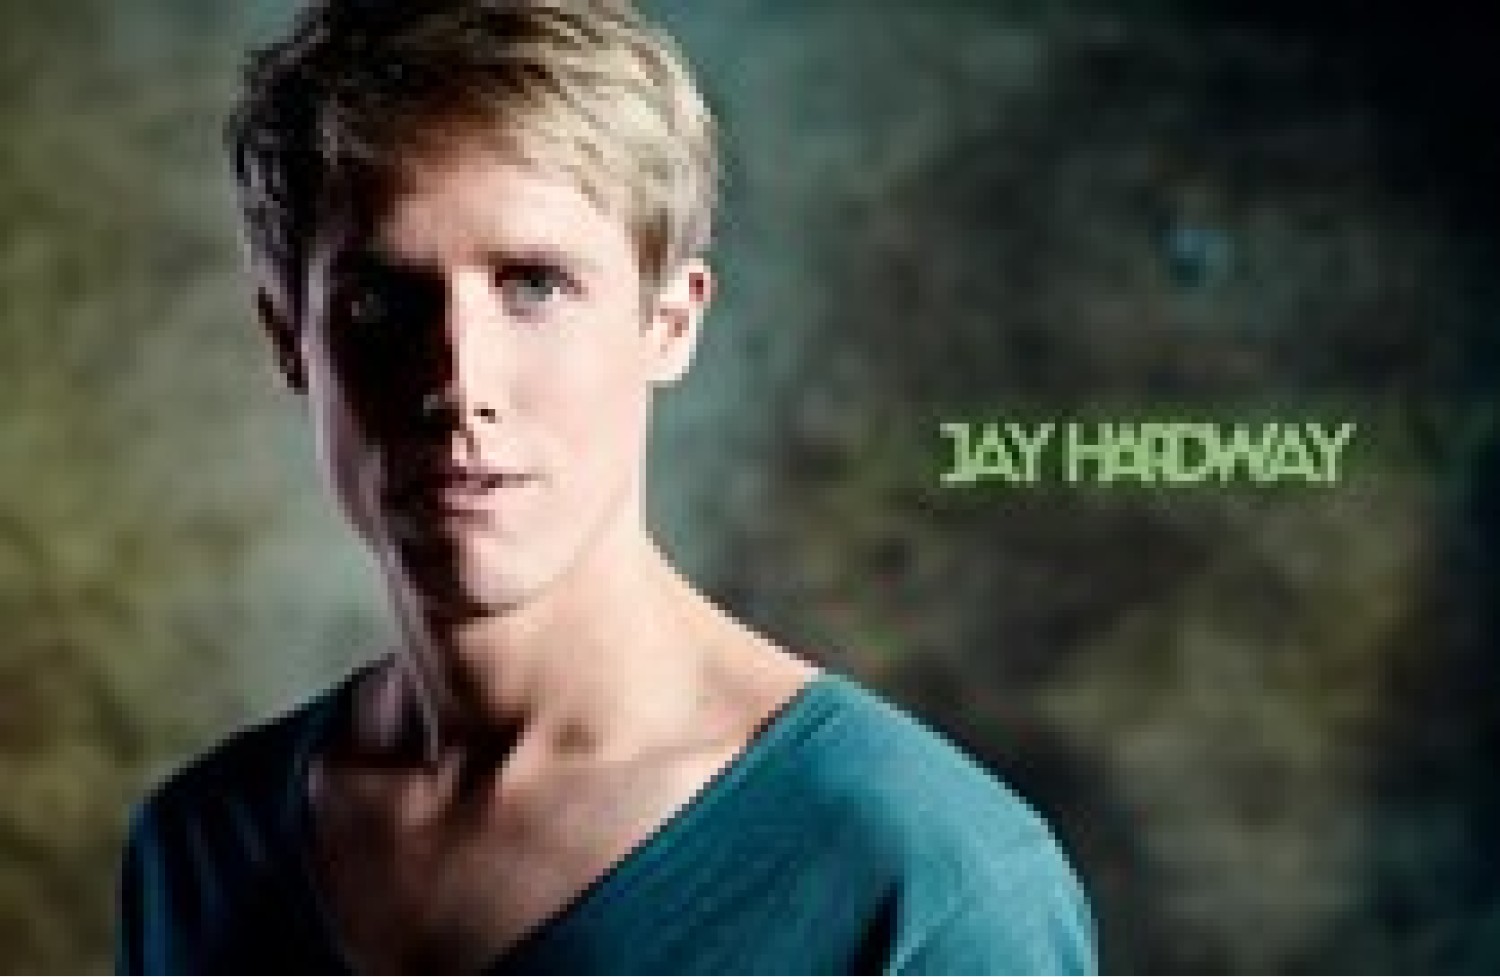 Interview: Jay Hardway - ADE